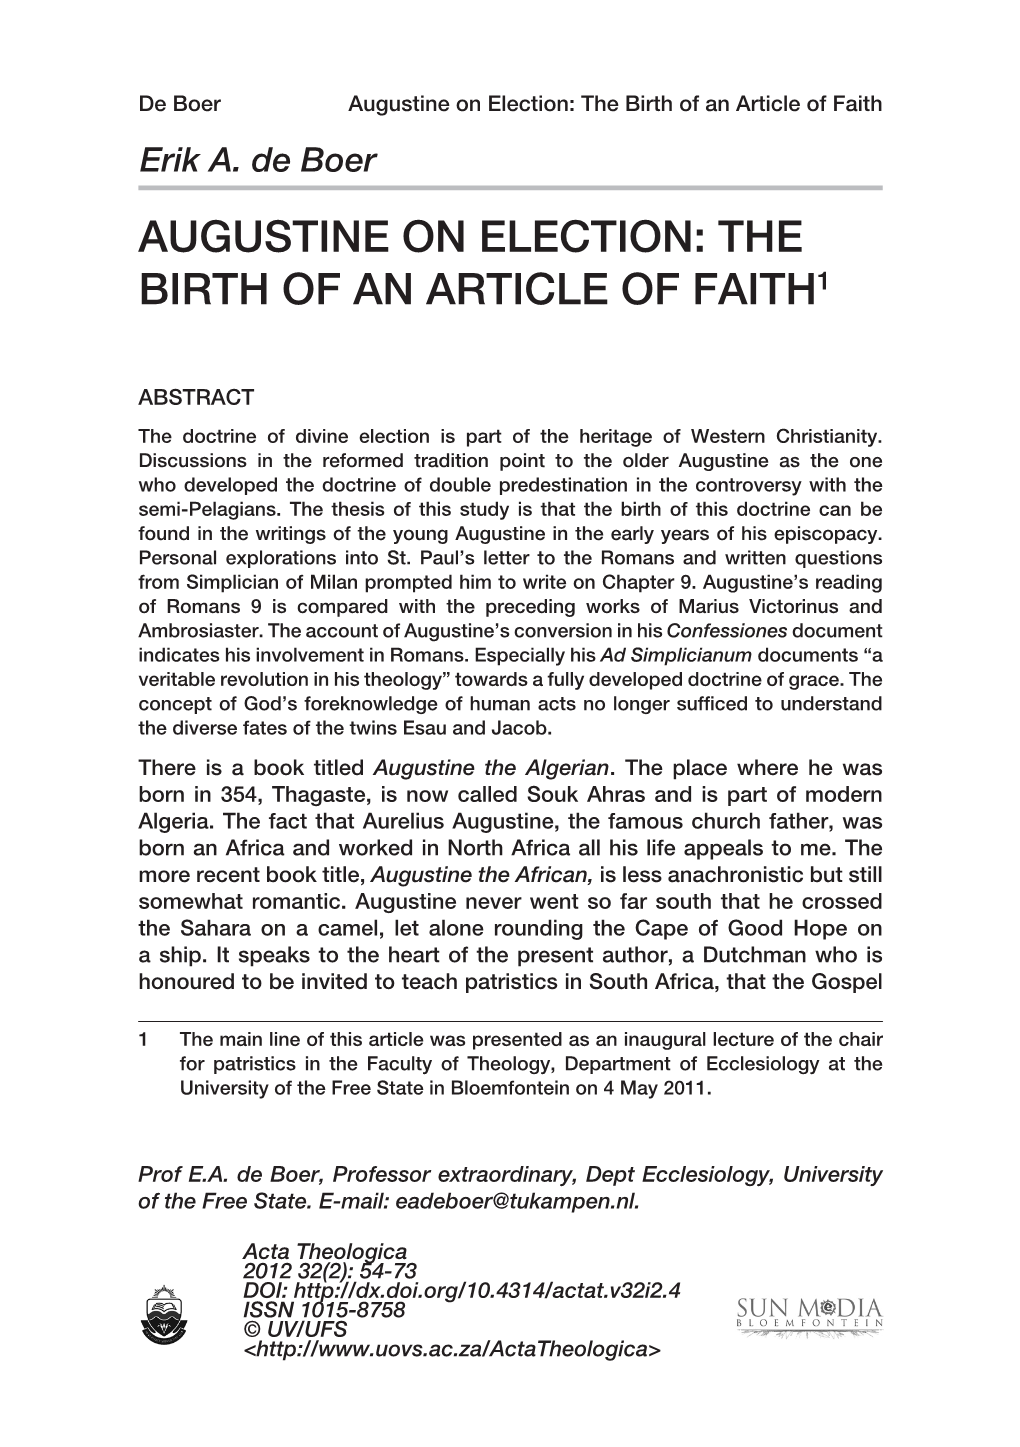 Augustine on Election: the Birth of an Article of Faith1